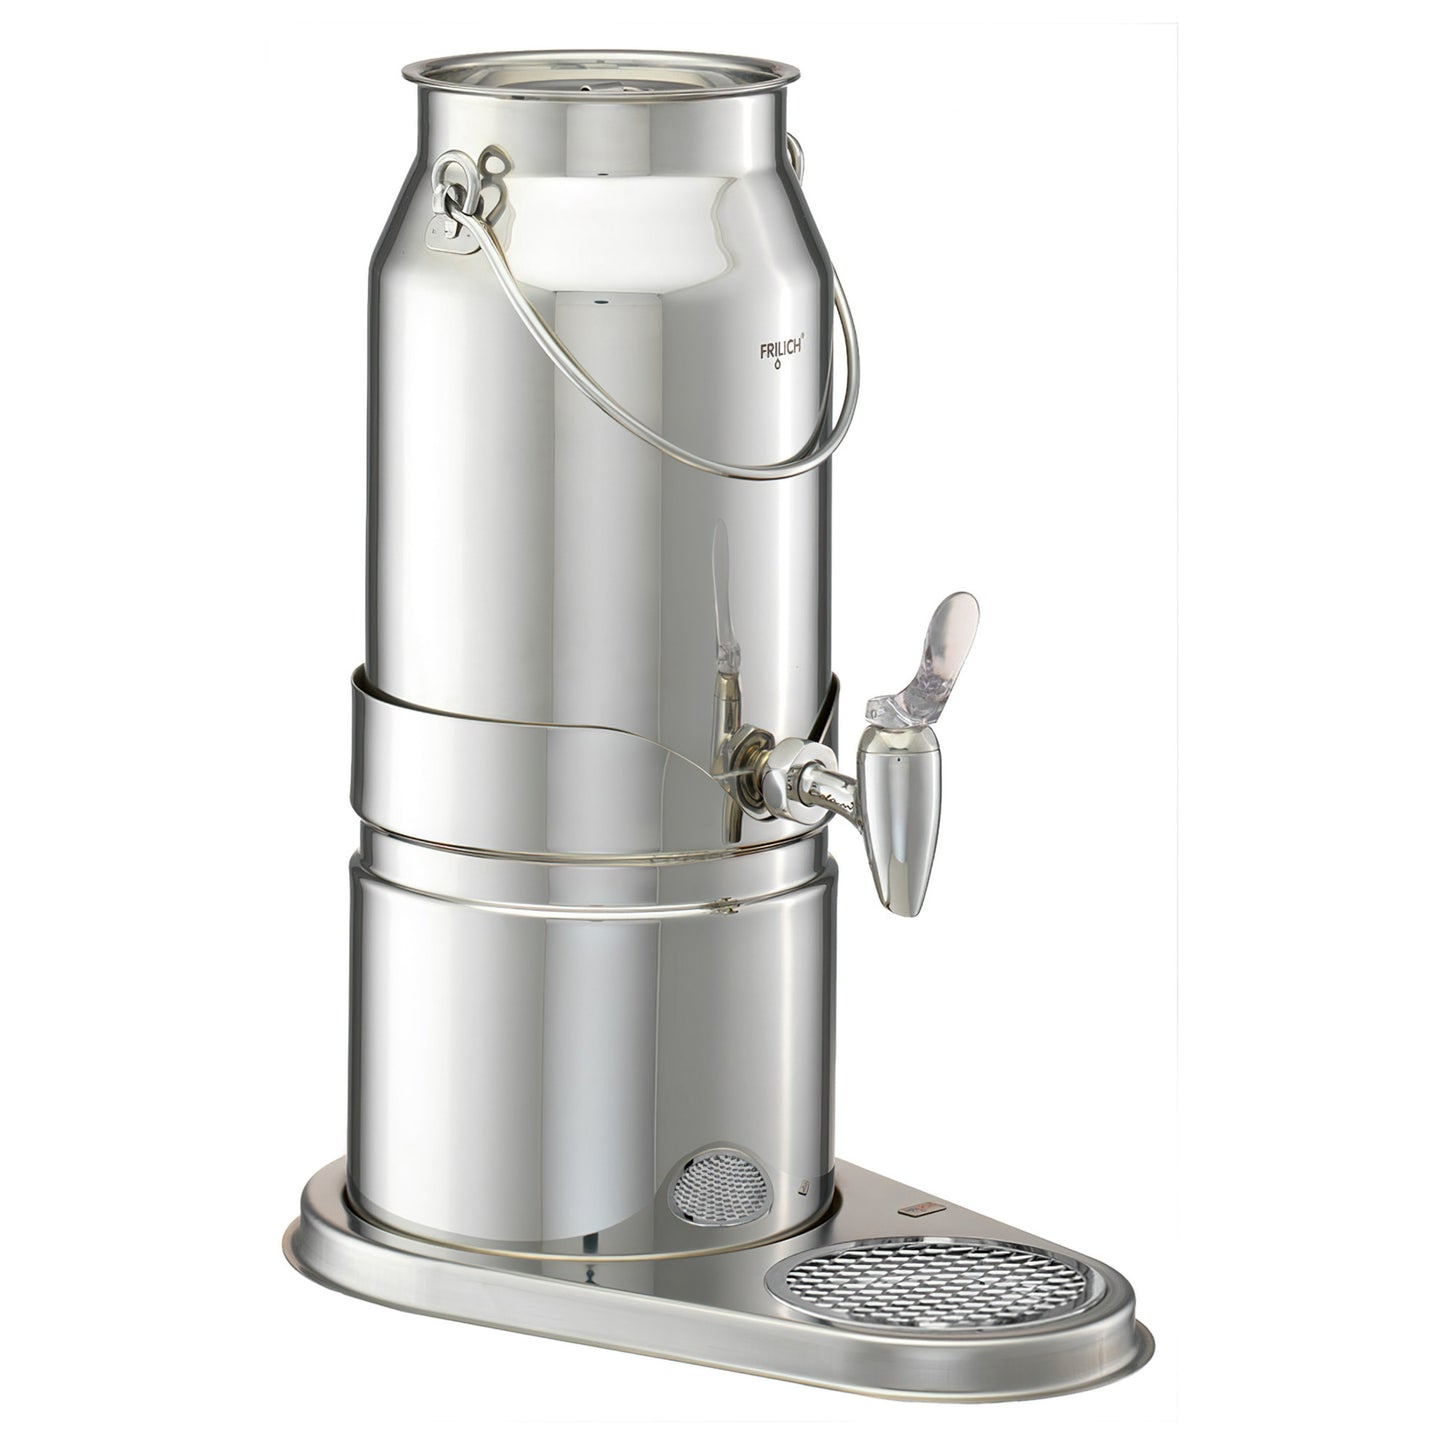 5.3 qt. / 1.3 gal./ 5L Stainless Steel Milk Dispenser Set. Includes Stainless Steel Can, Crushed Ice Tube, Drip Tray, Cooling Pack, and Base. 14.6" x 9.3", 17.3" tall. FRILICH EMC050E ELEGANCE